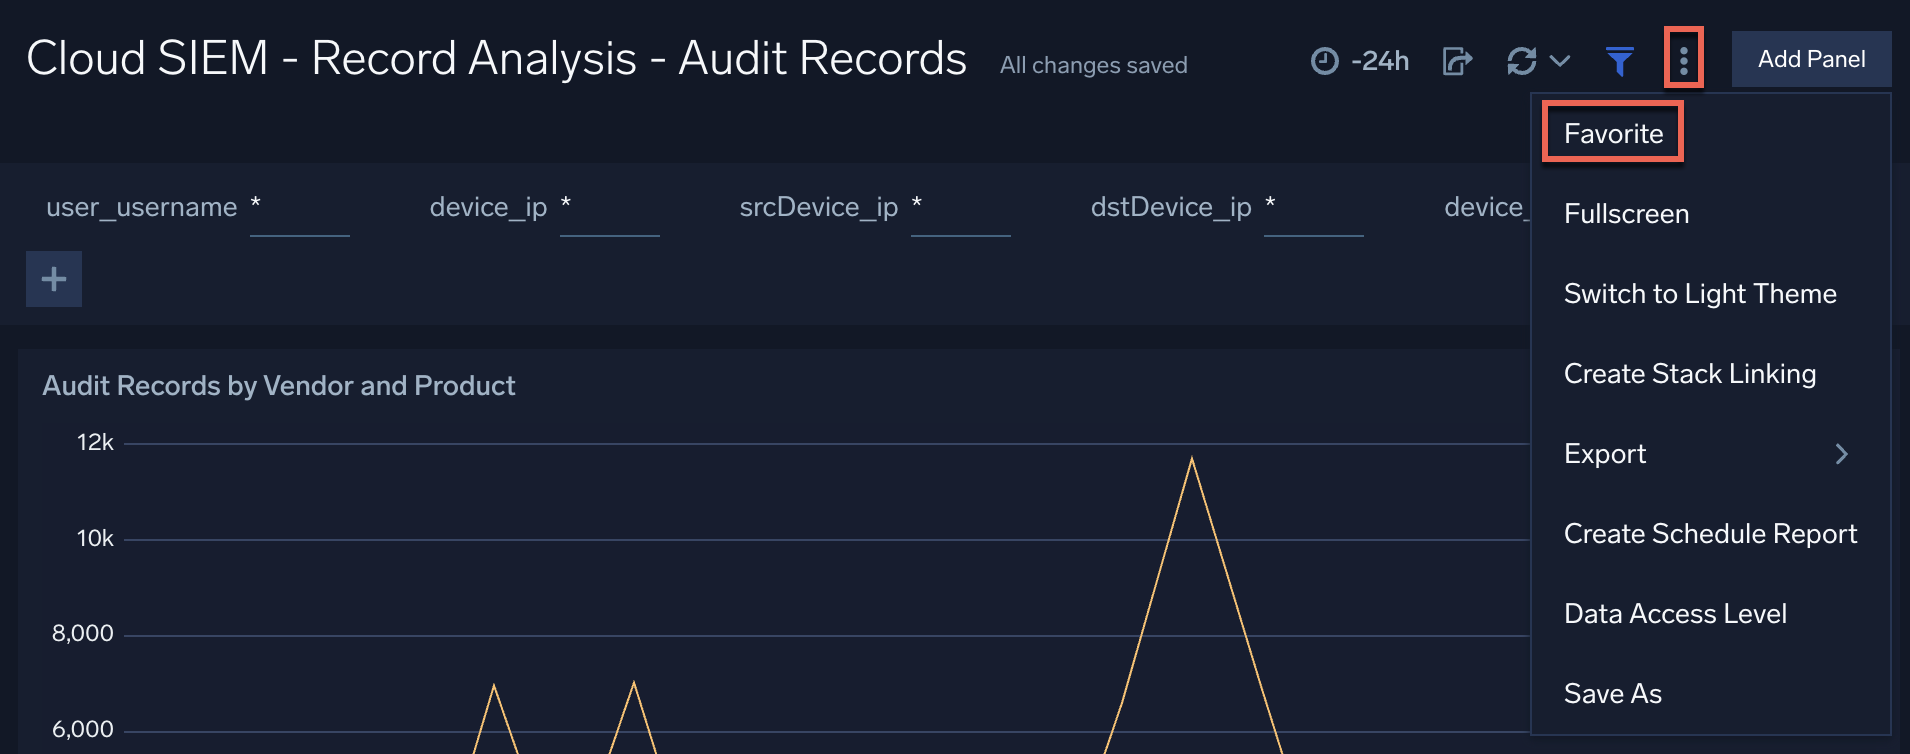 WTS_UI_Add-dashboard-to-Favorites.png